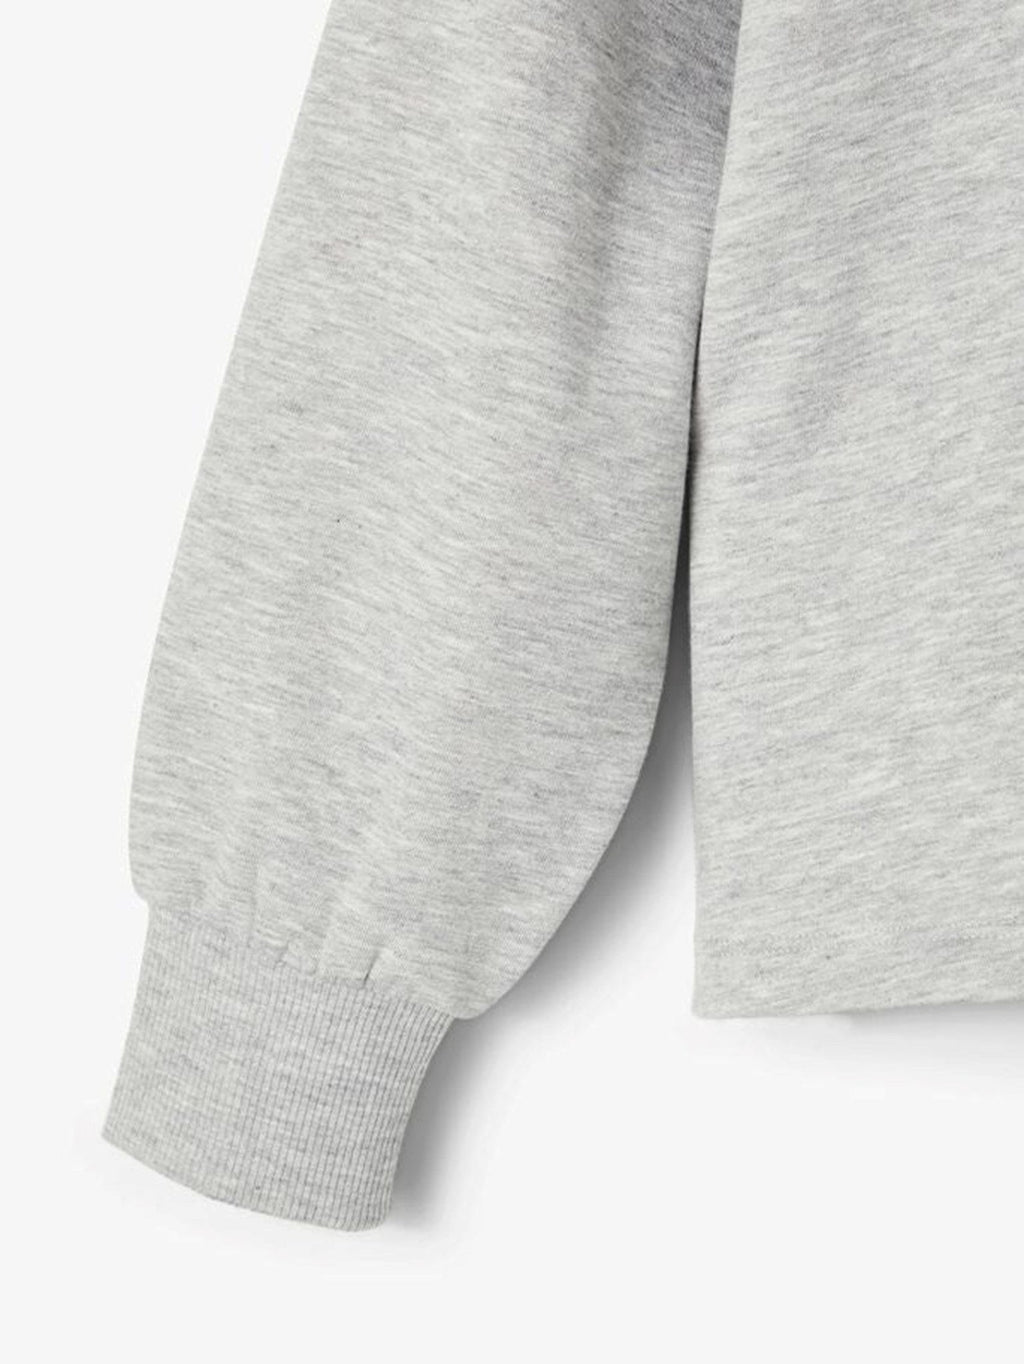 Cropped hoodie - Light gray